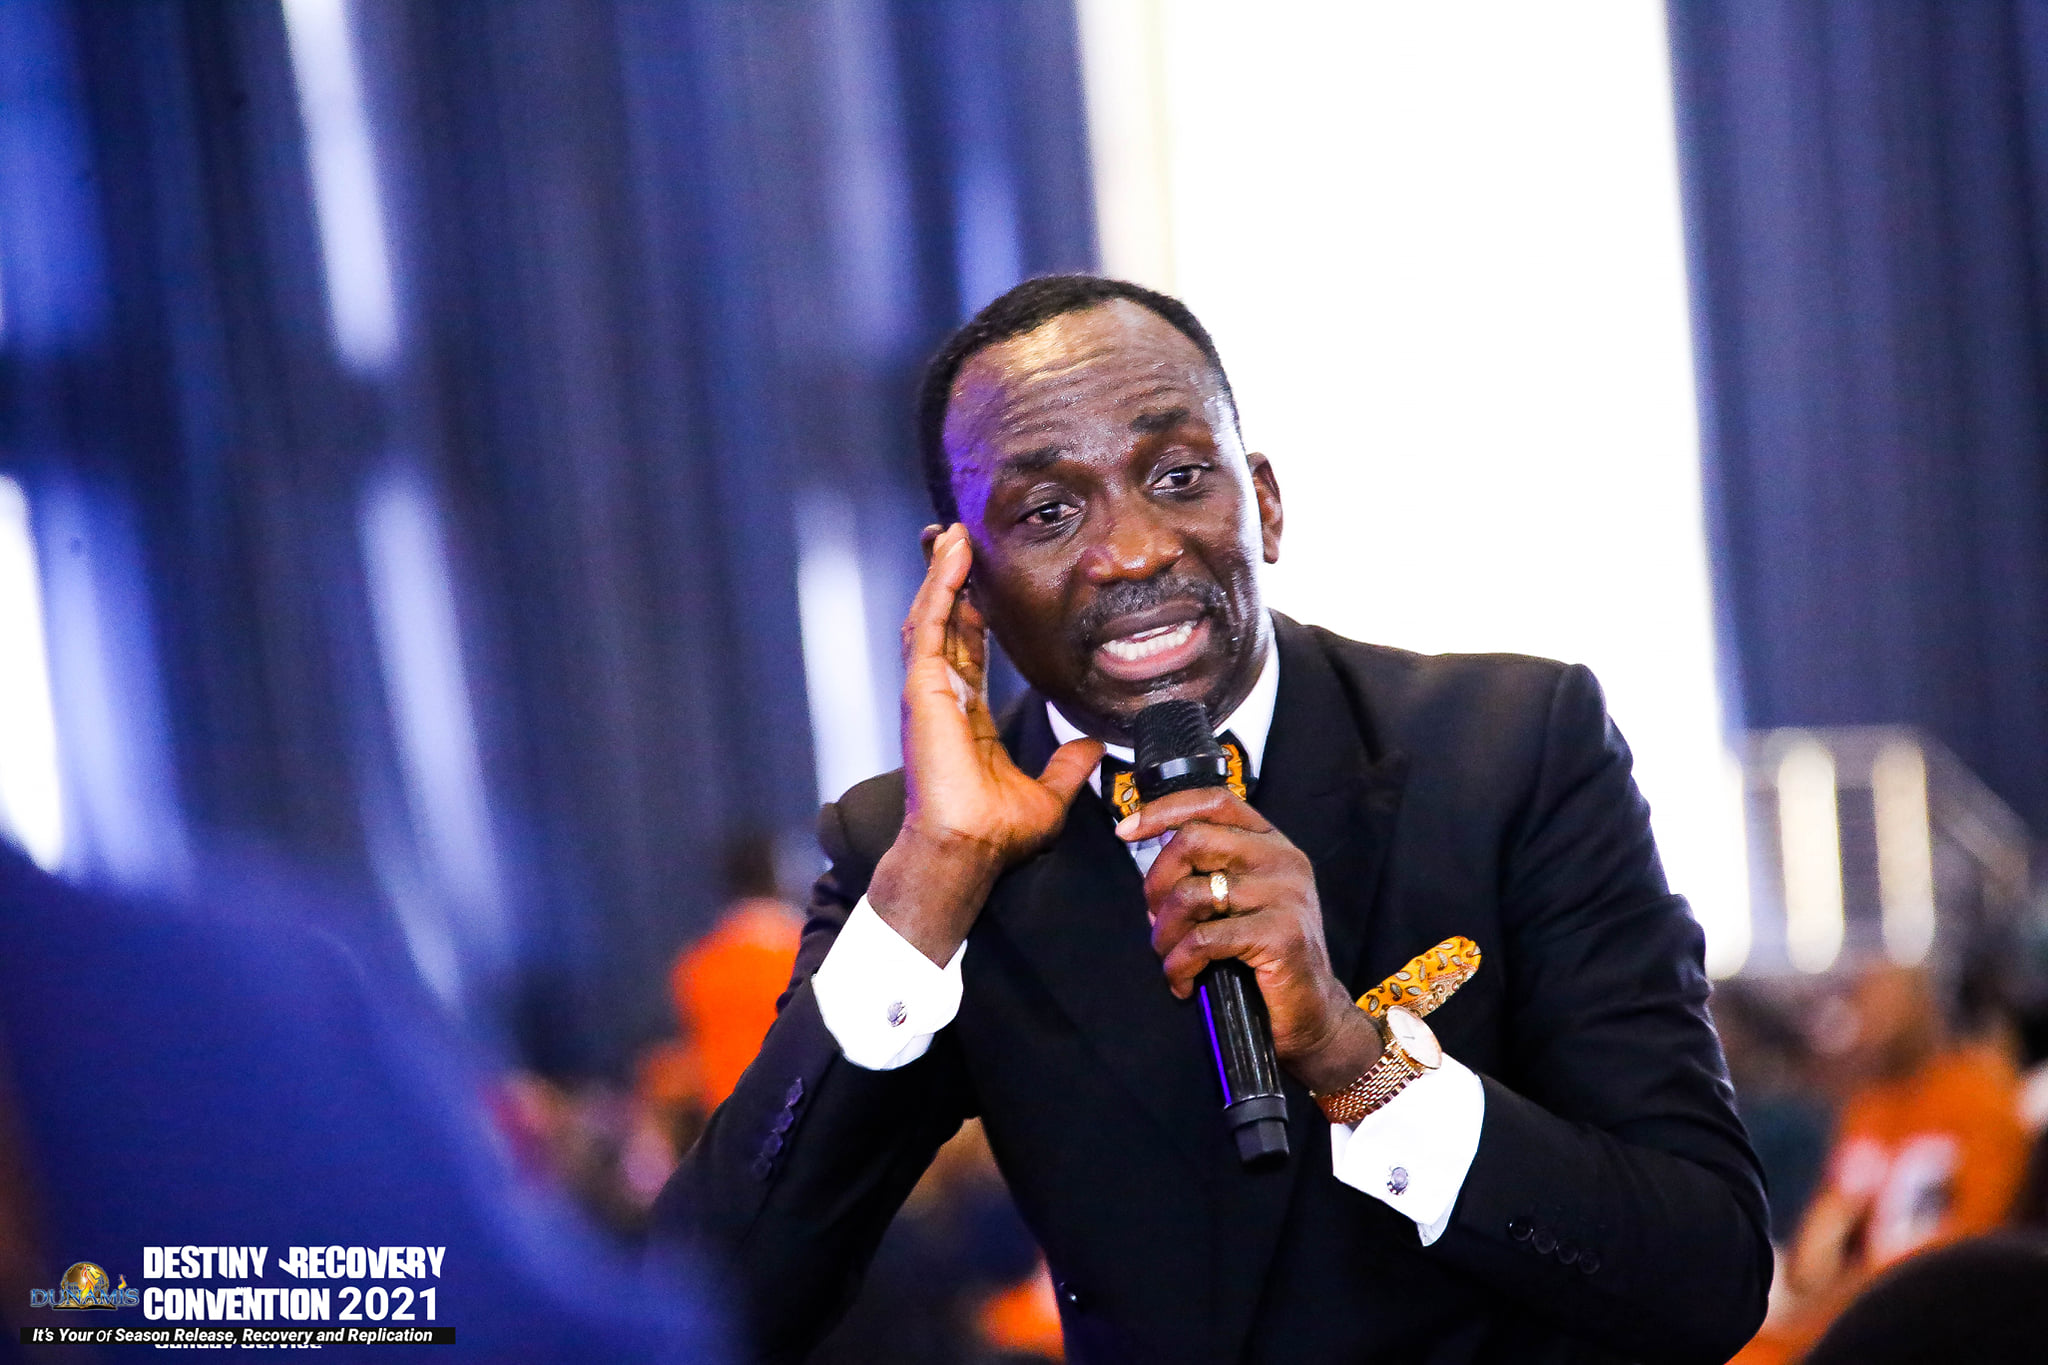 The Deliverance Power of Prayer mp3 by Dr. Pastor Paul Enenche